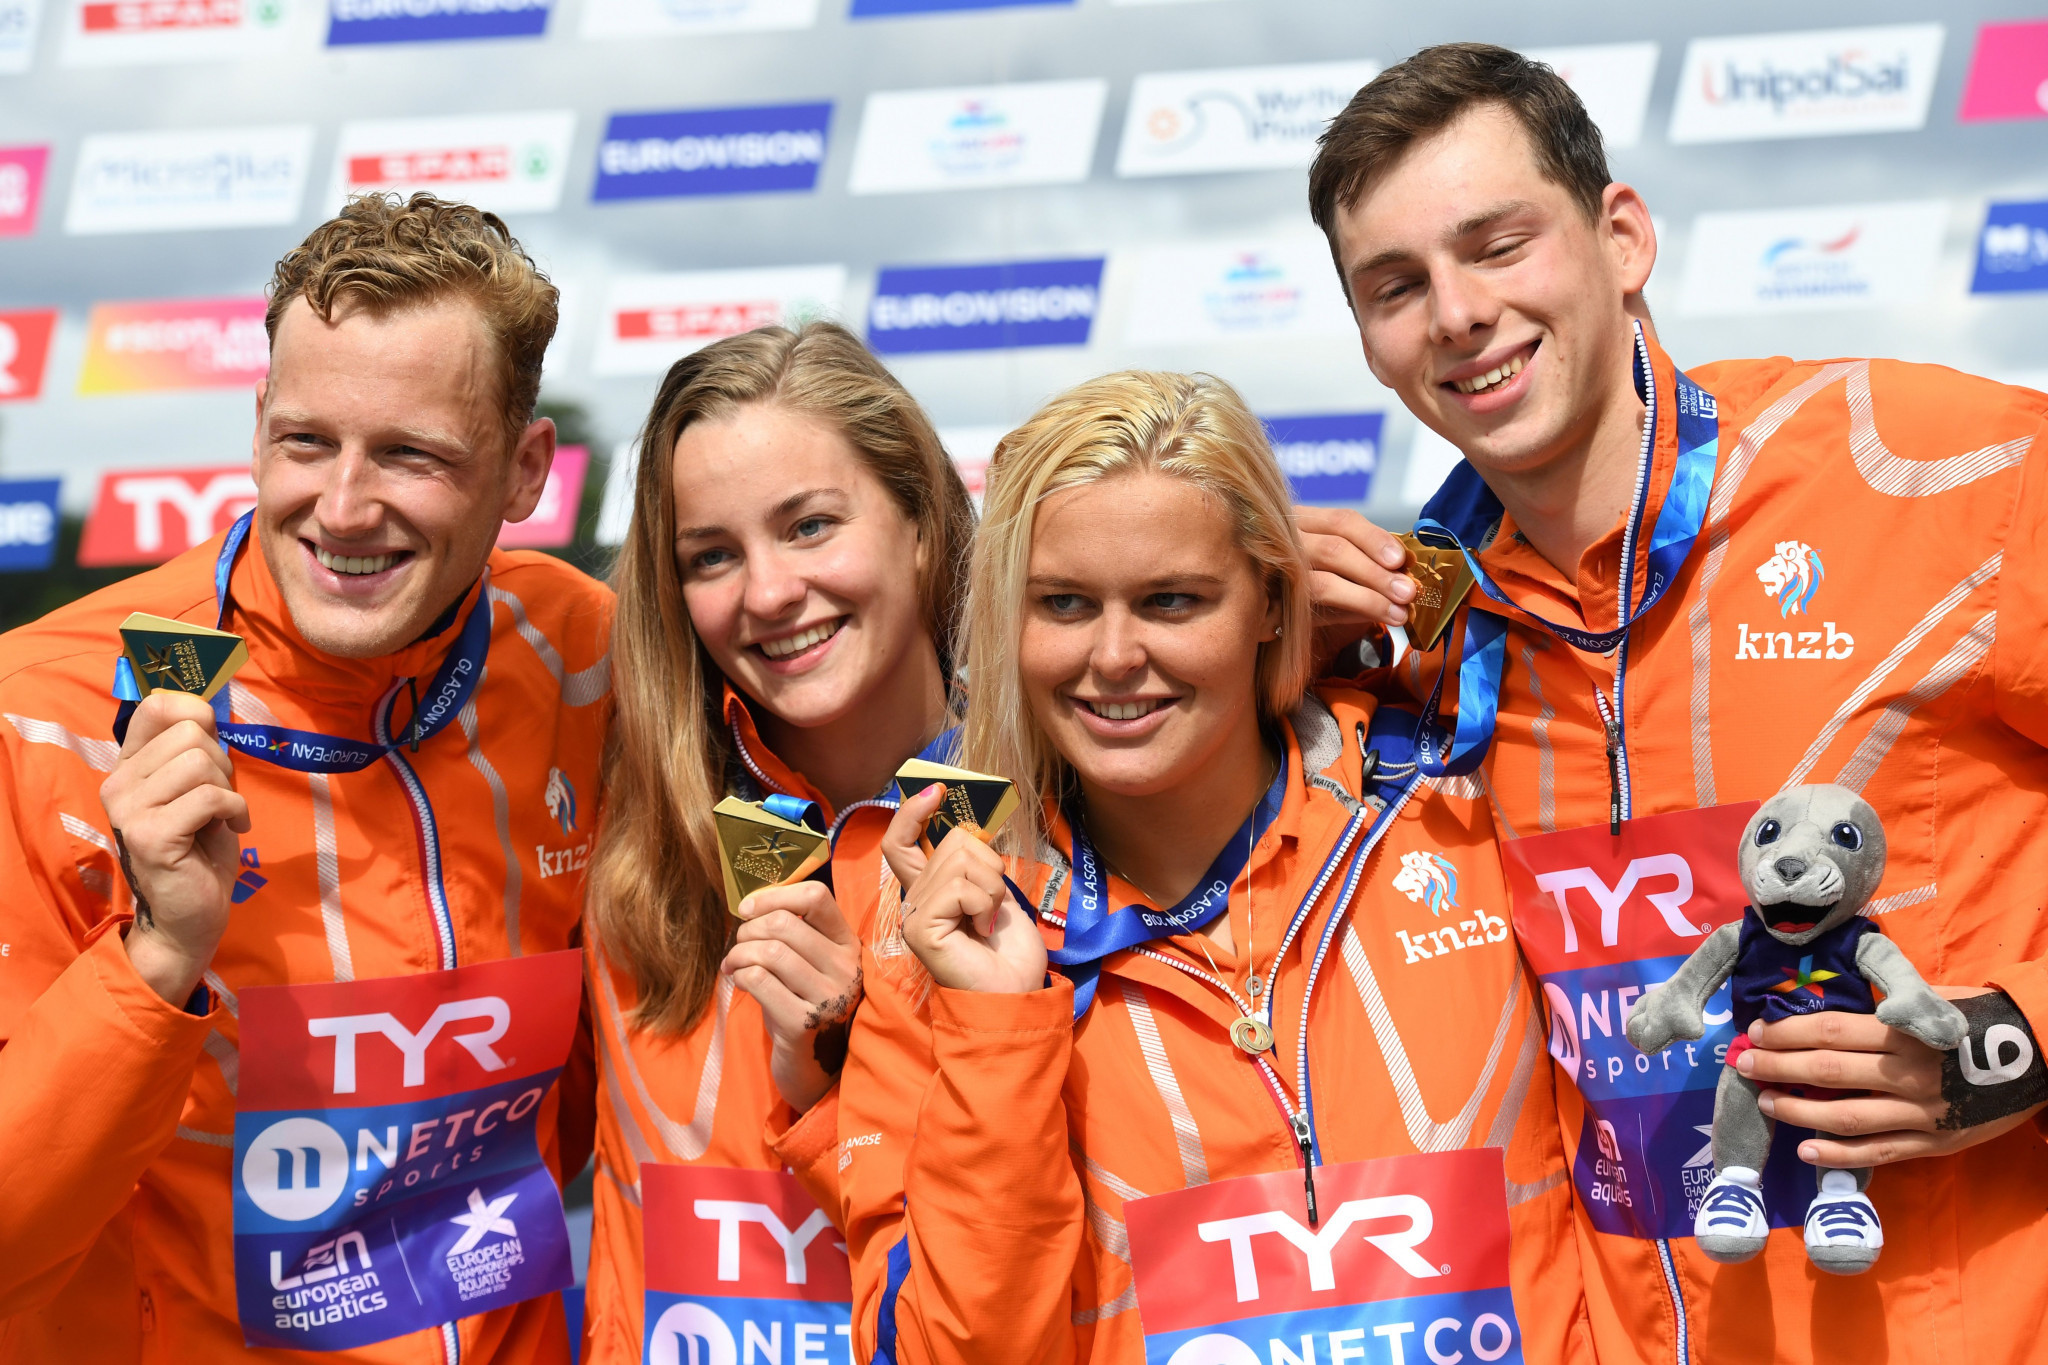 Dutch domination of open water swimming continues with mixed relay title at European Championships